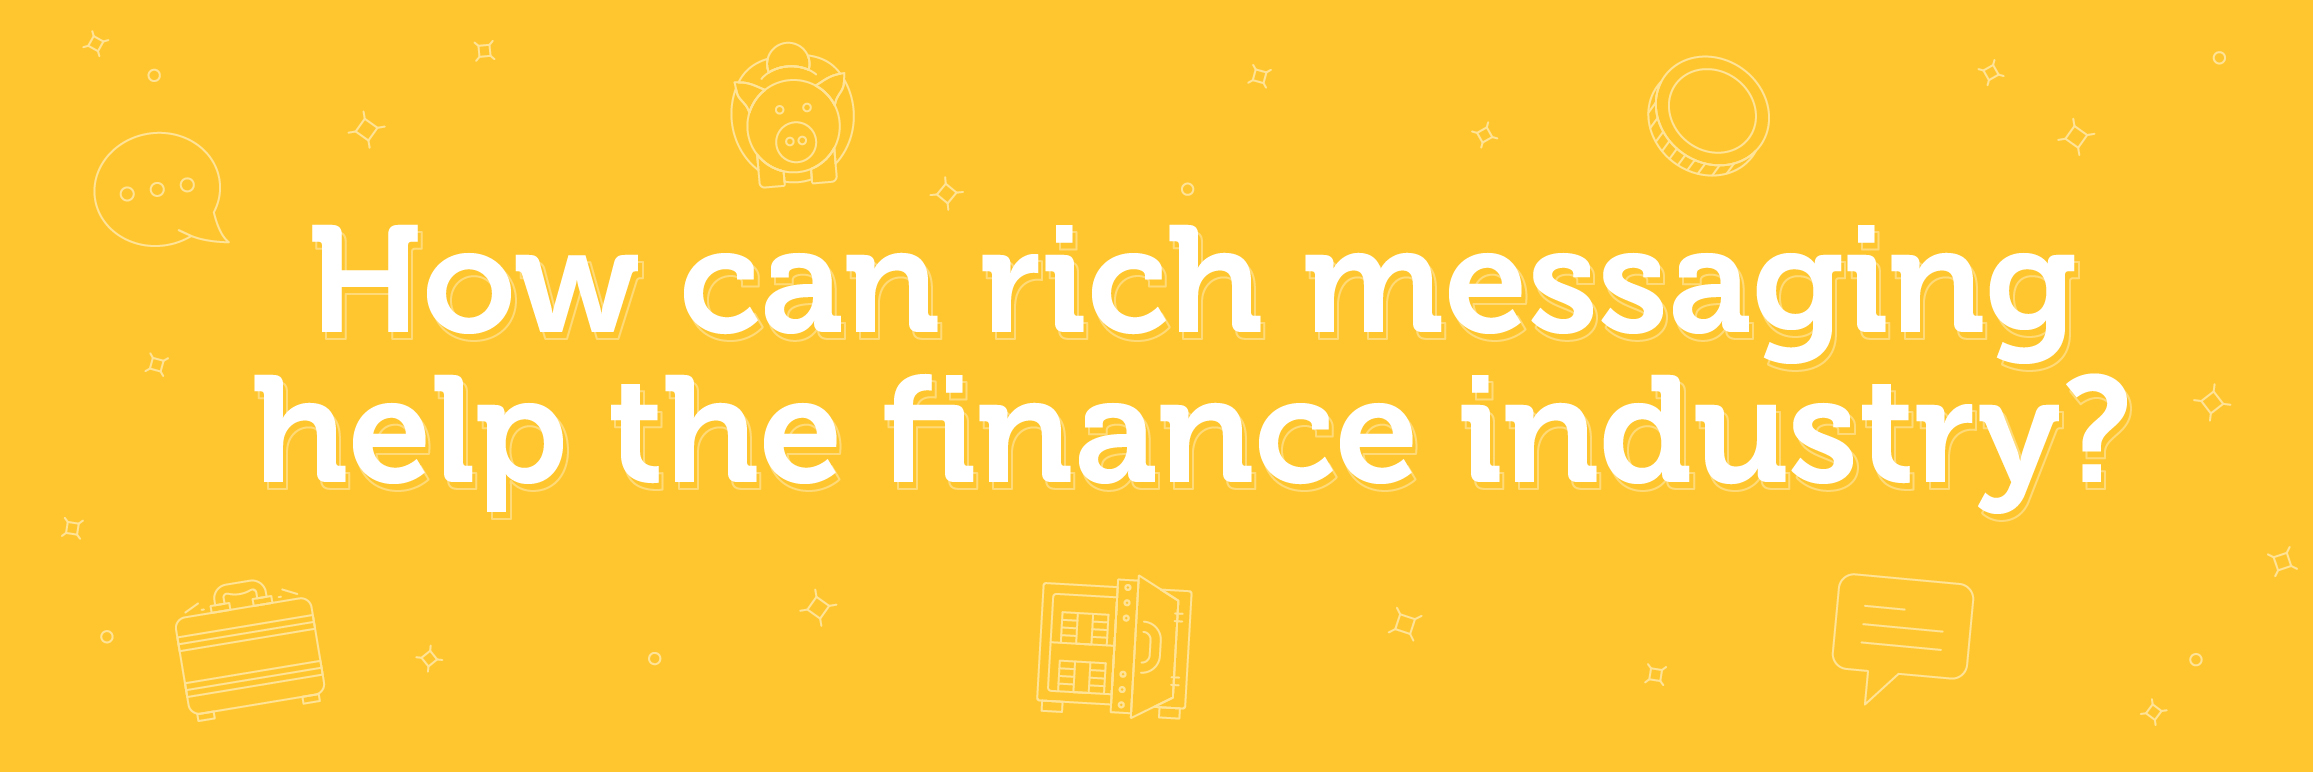 Rich messaging and the finance industry